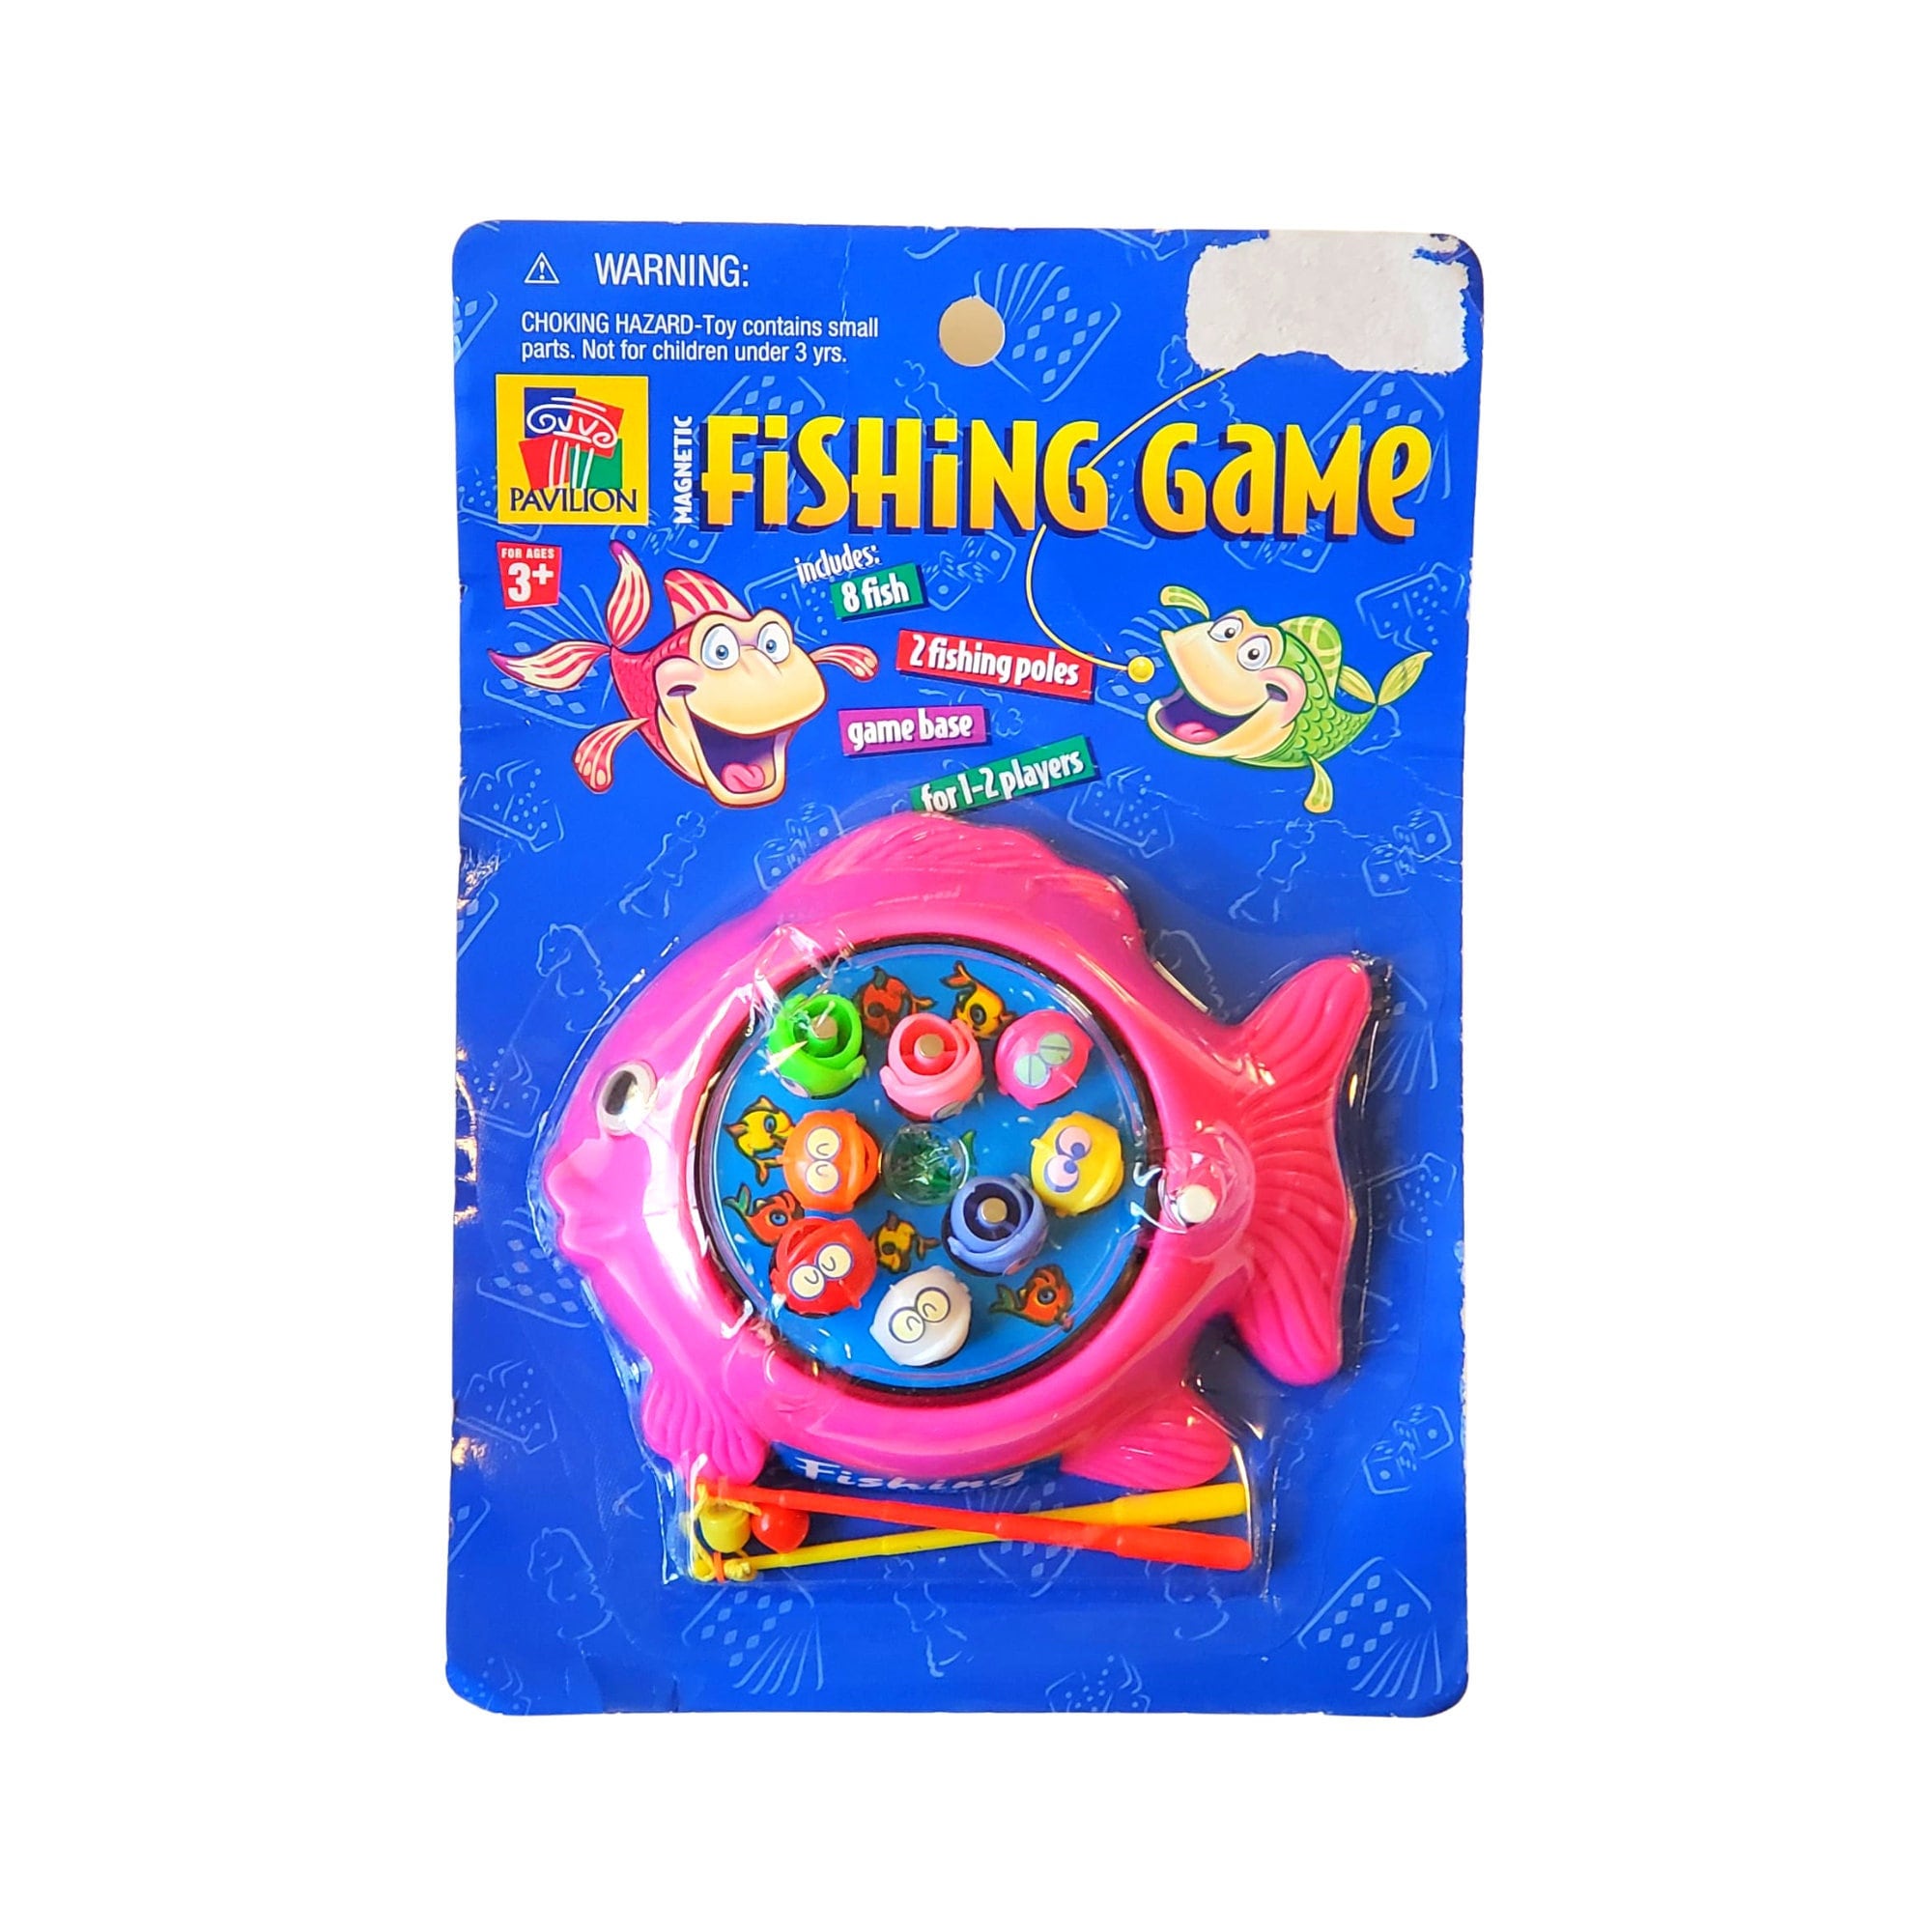 Vintage 1990s Magnetic Fishing Game, Sealed, Toys-r-us Original toys-r-us  Collectible, Classic Toy, Teaching Toy, Learning Toy 